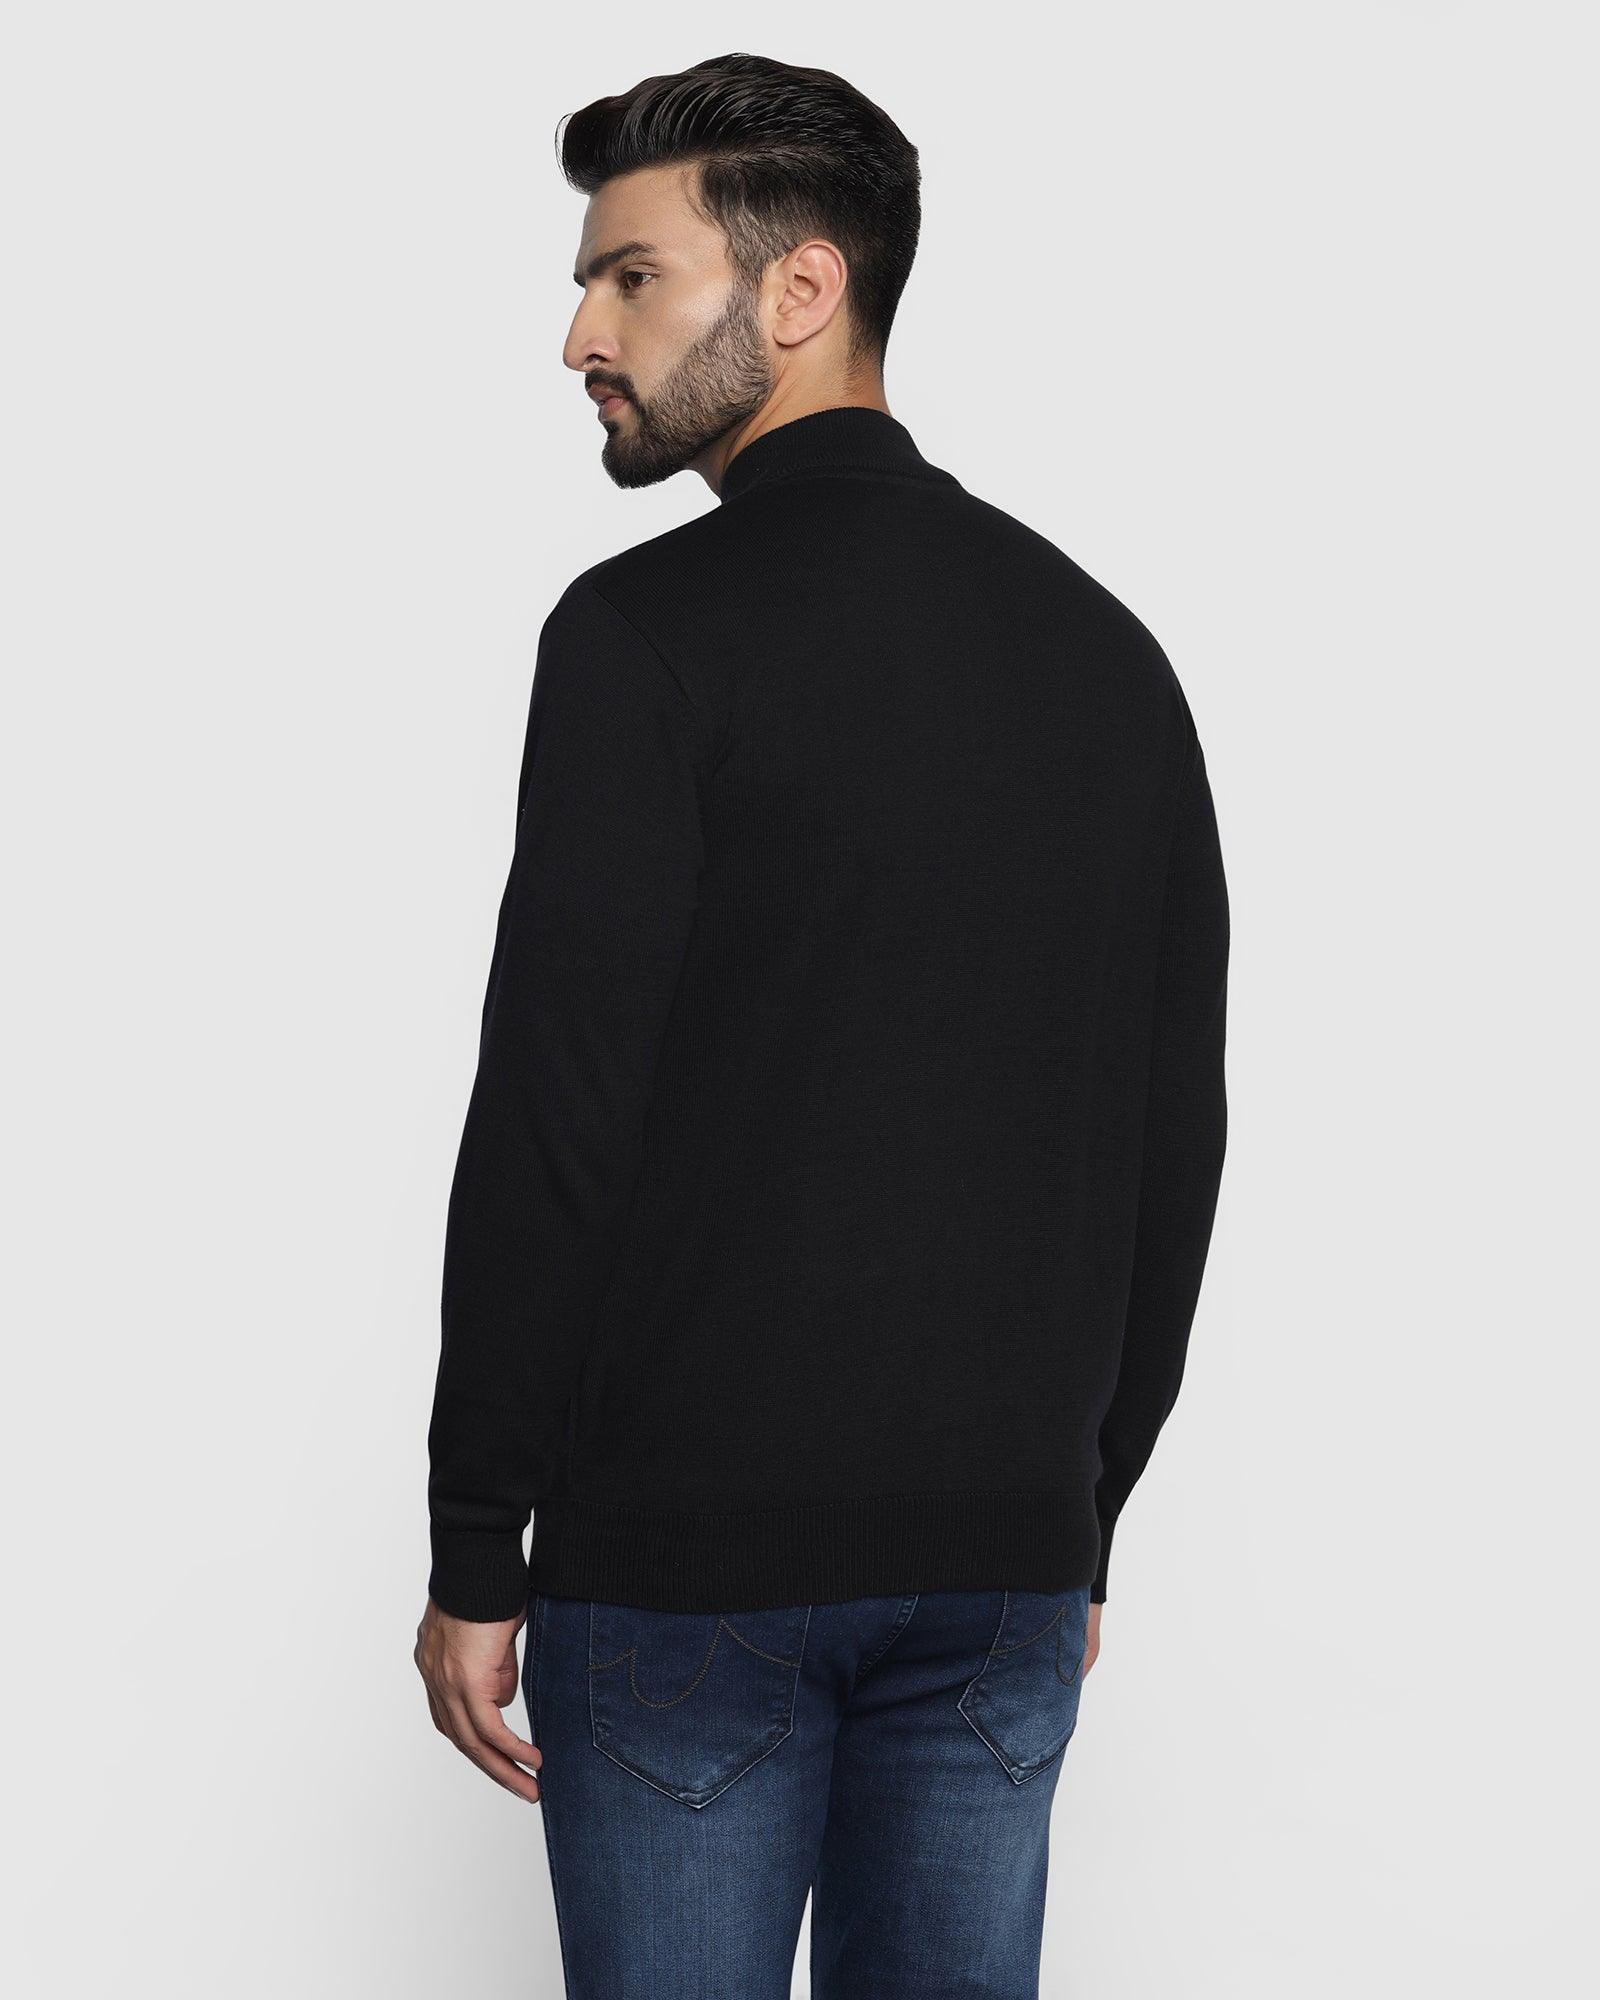 Stylized Collar Black Solid Sweater - Denver